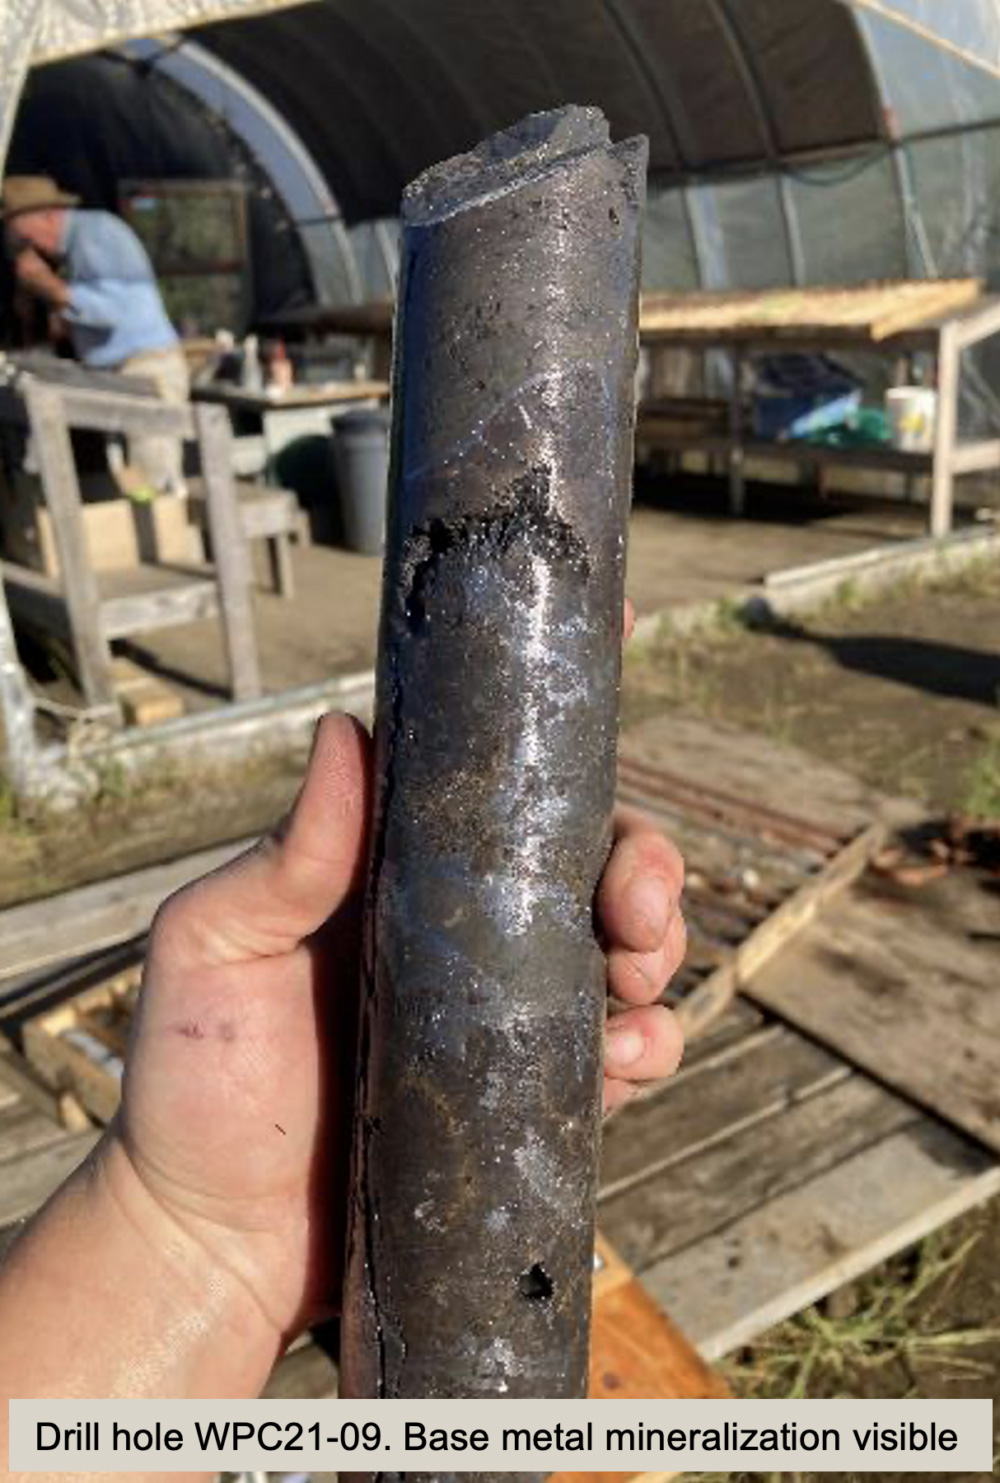 Drill hole WPC21-09. Base metal mineralization visible